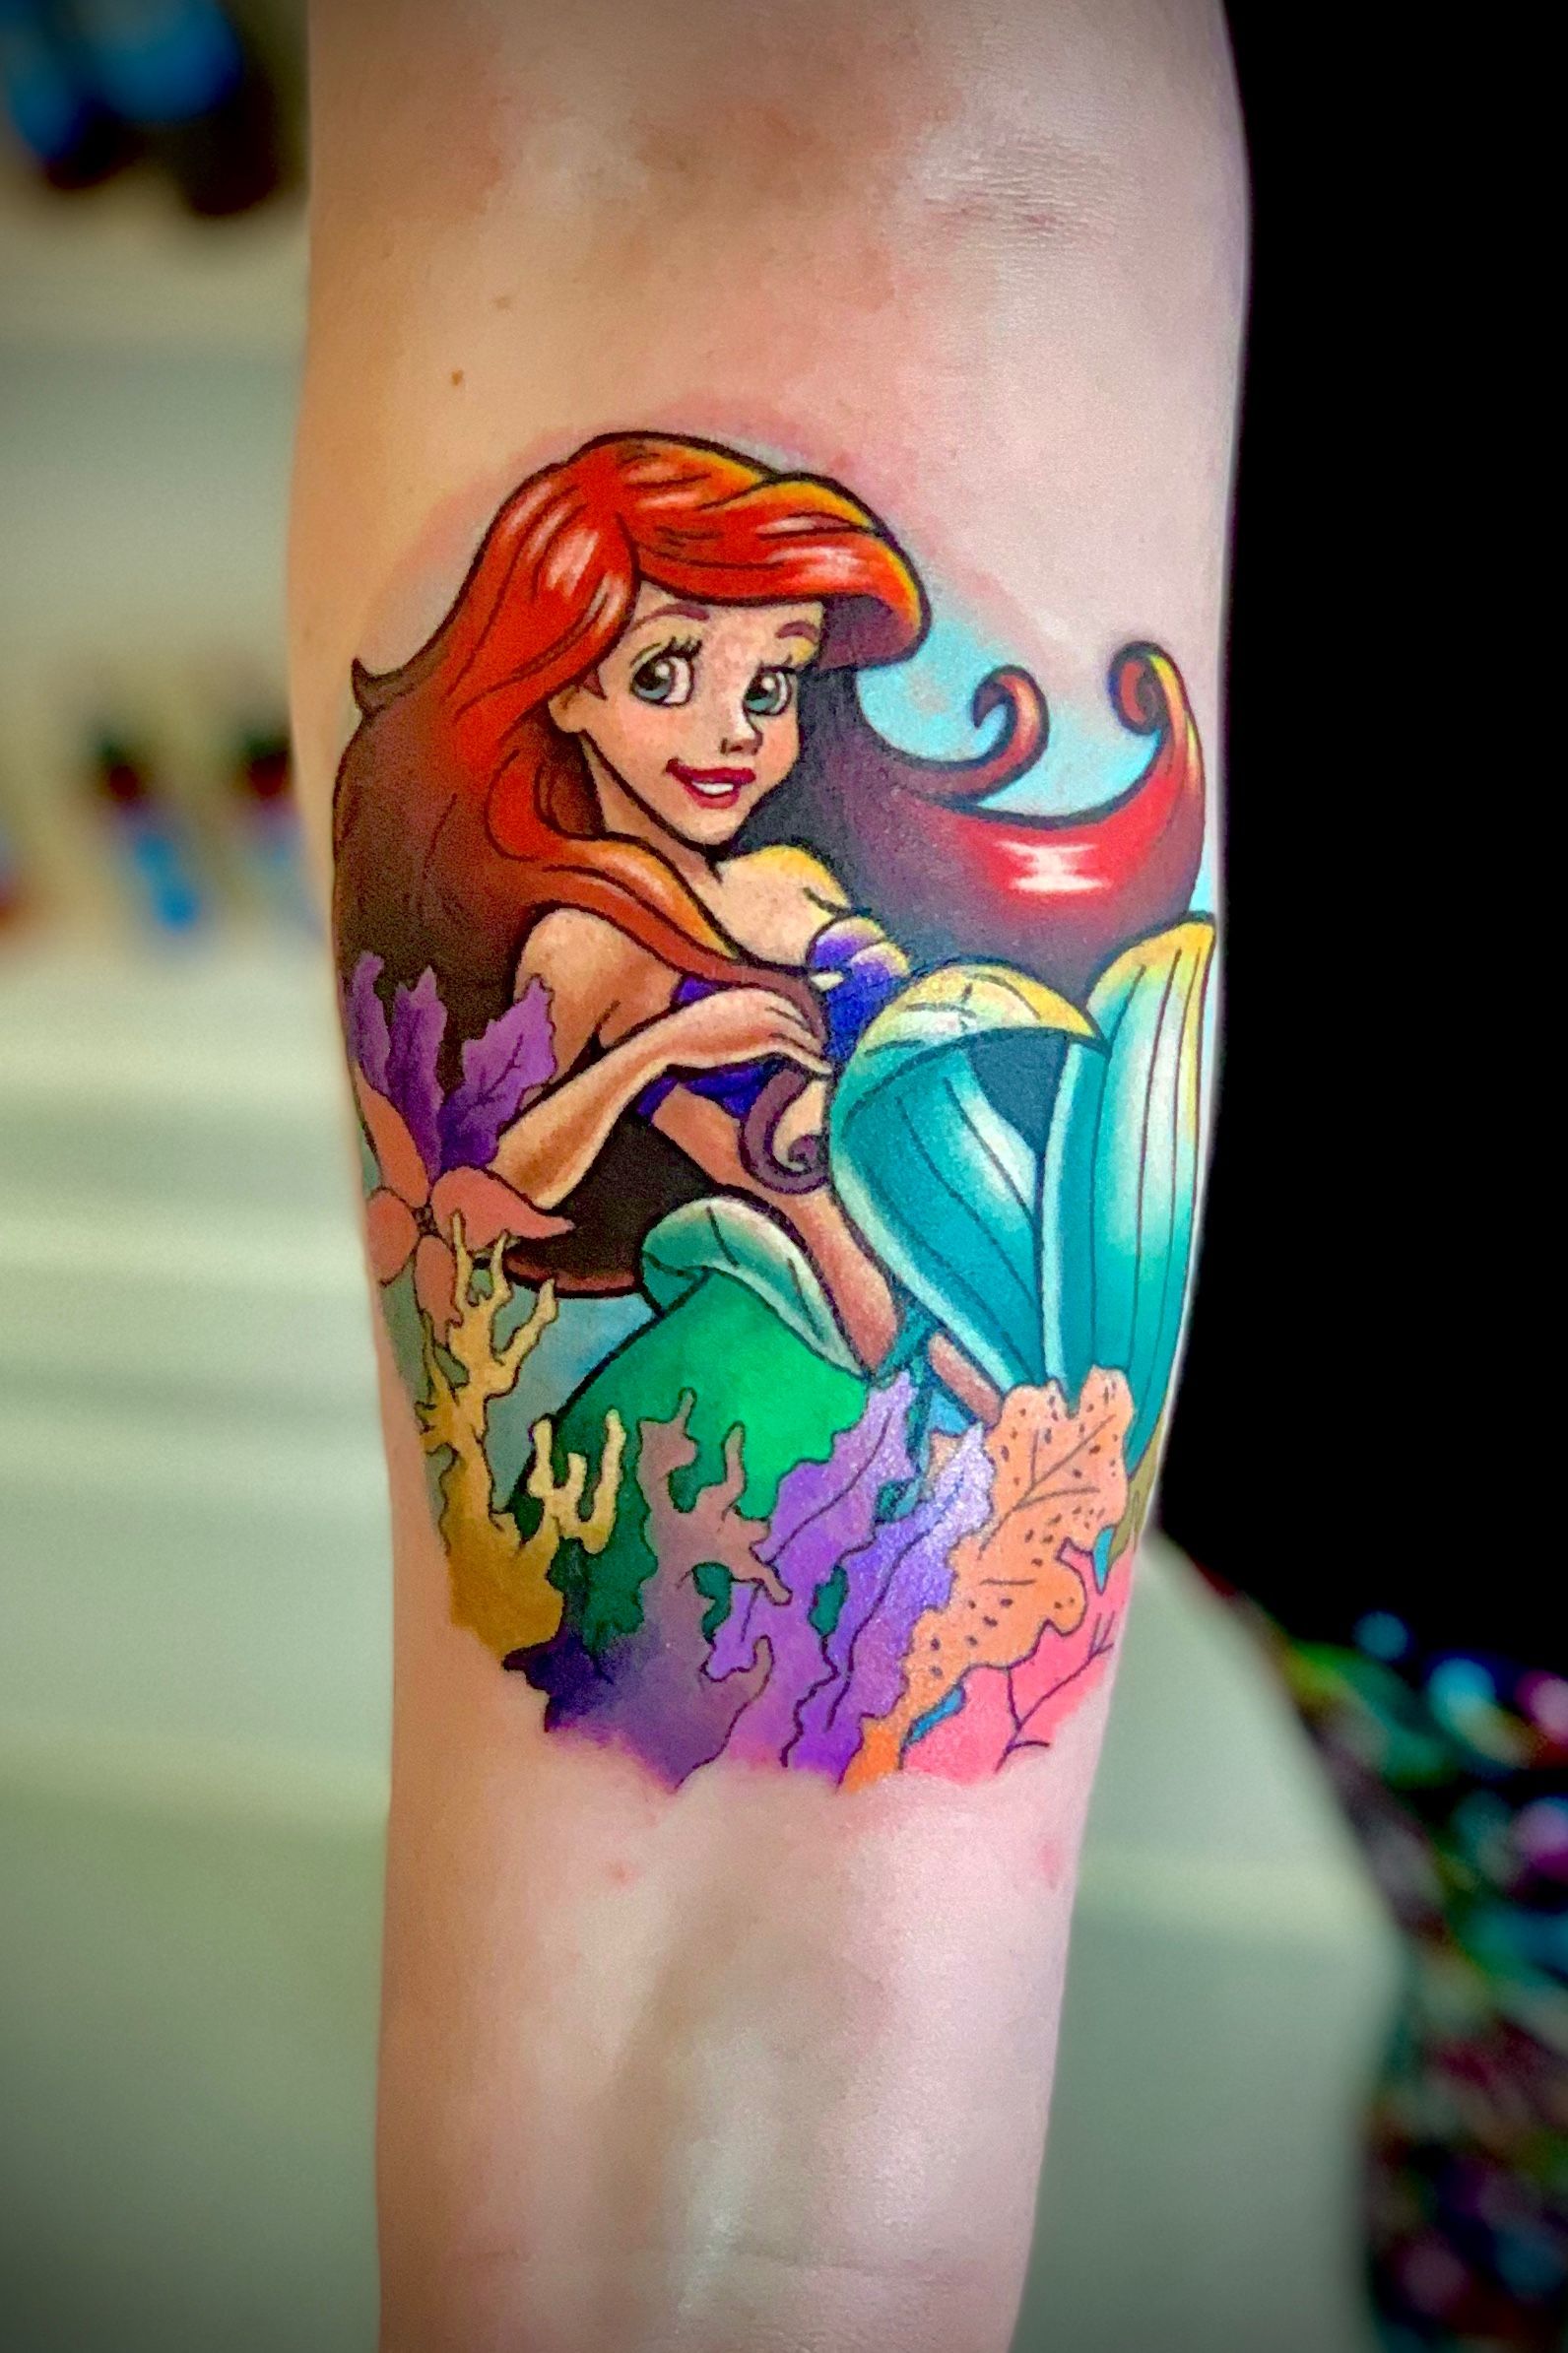 Design a realism tattoo featuring a dark version of the little mermaid   Tattoo contest  99designs